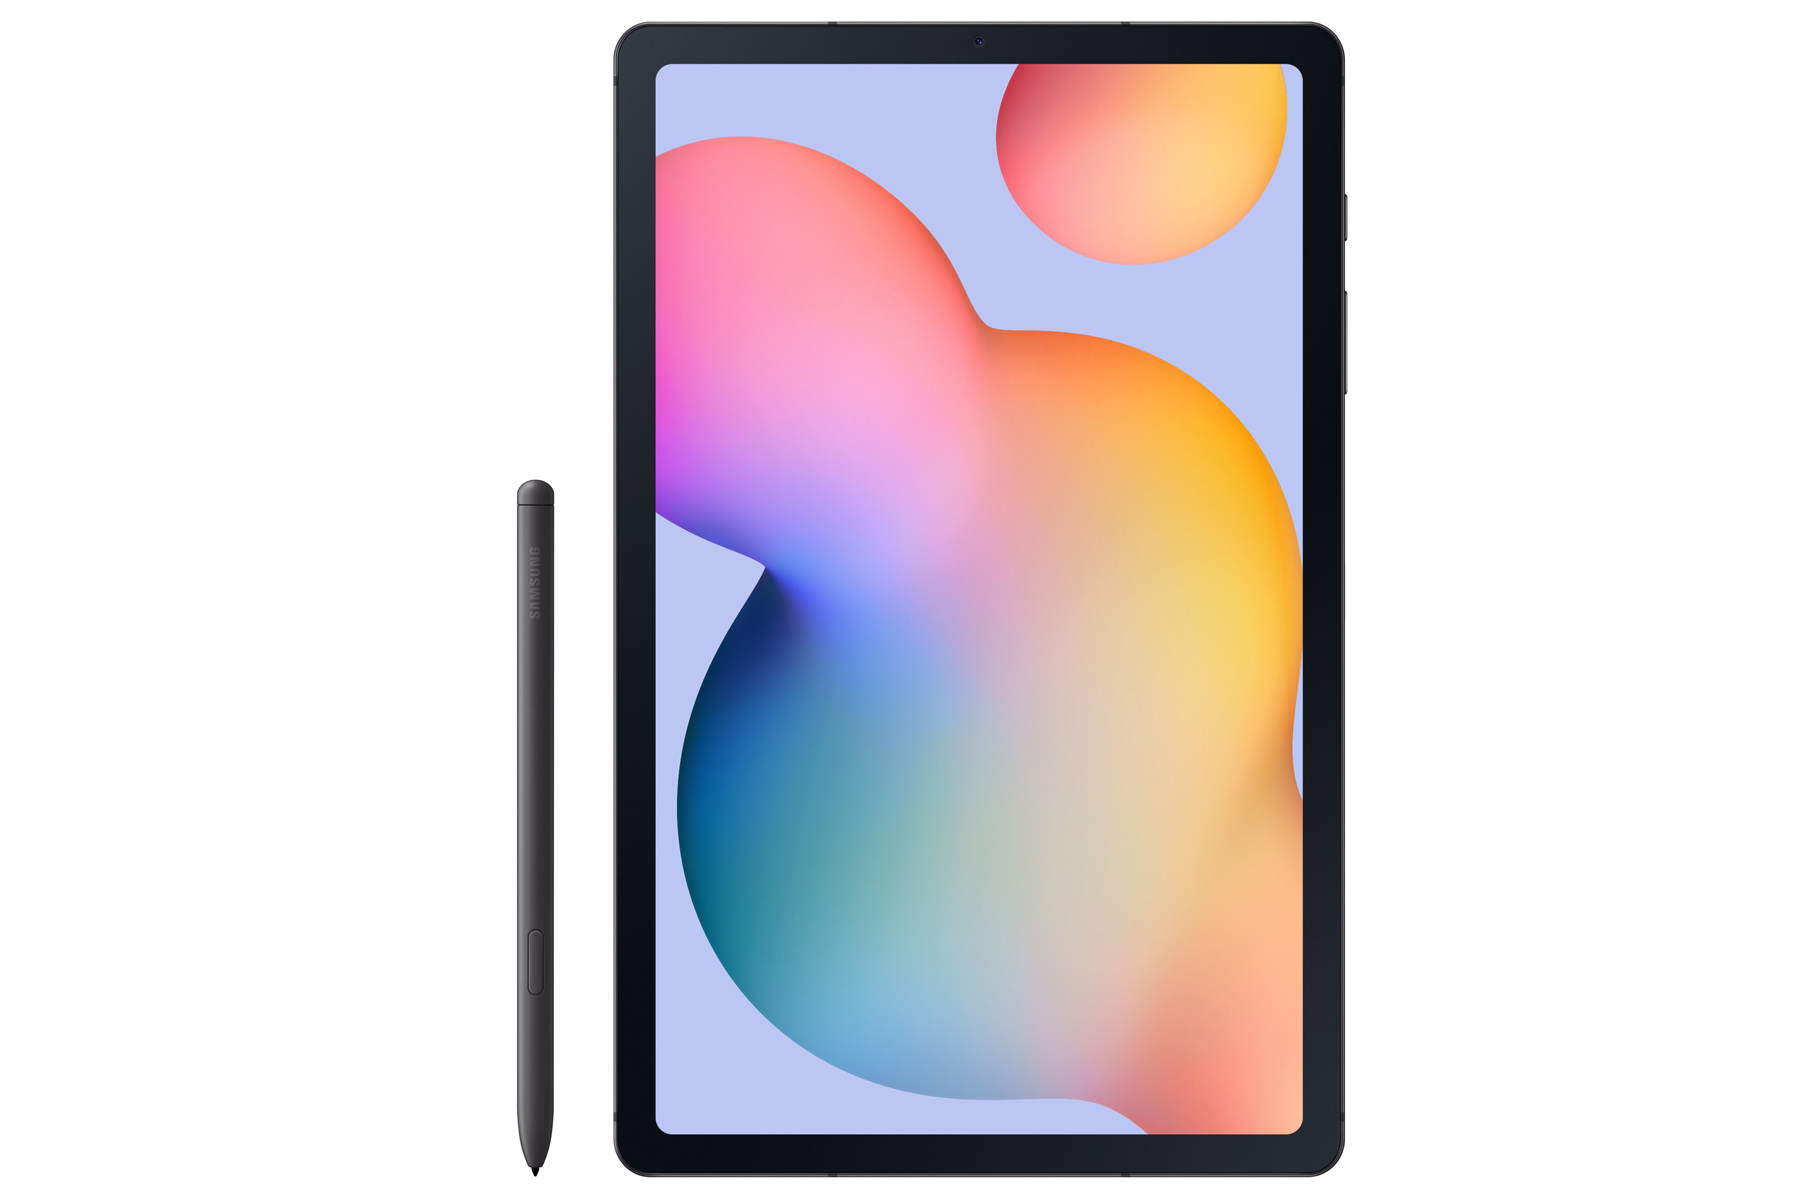 008_galaxytabs6_lite_oxford_gray_front_with_s_pen.jpg